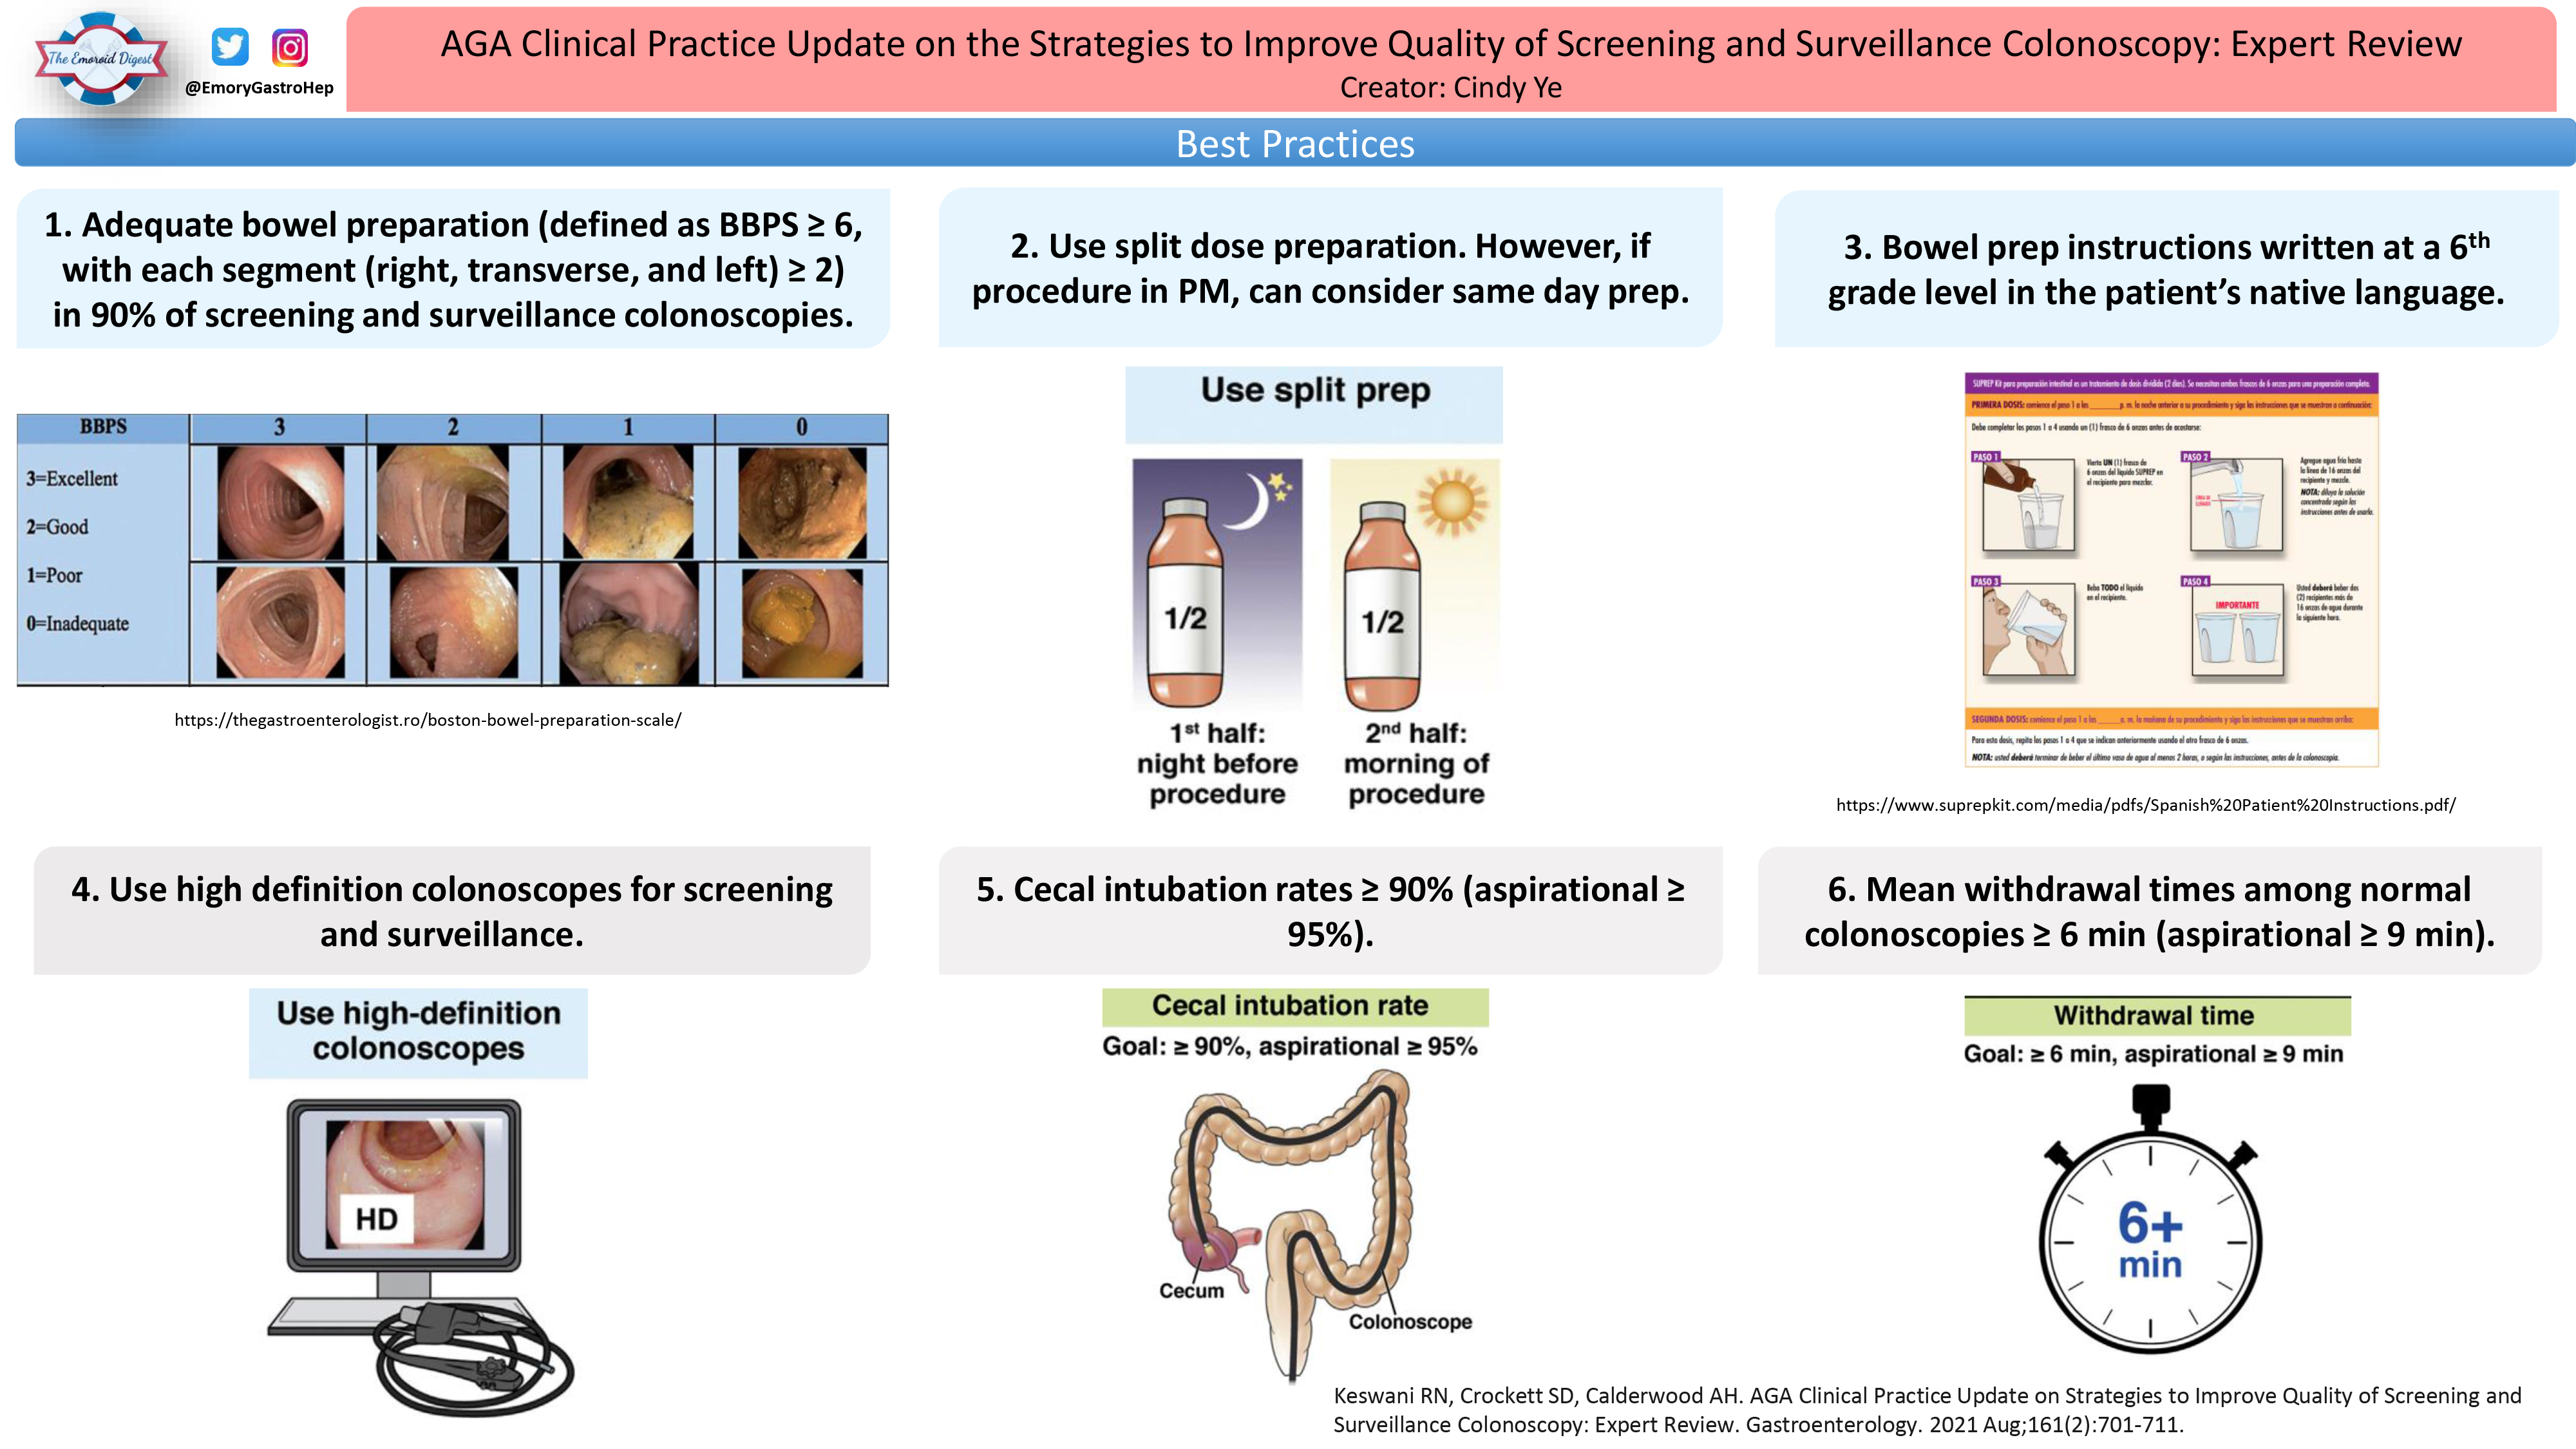 AGA Clinical Practice Update on the Strategies to Improve Quality of Screening and Surveillance Colonoscopy: Expert Review